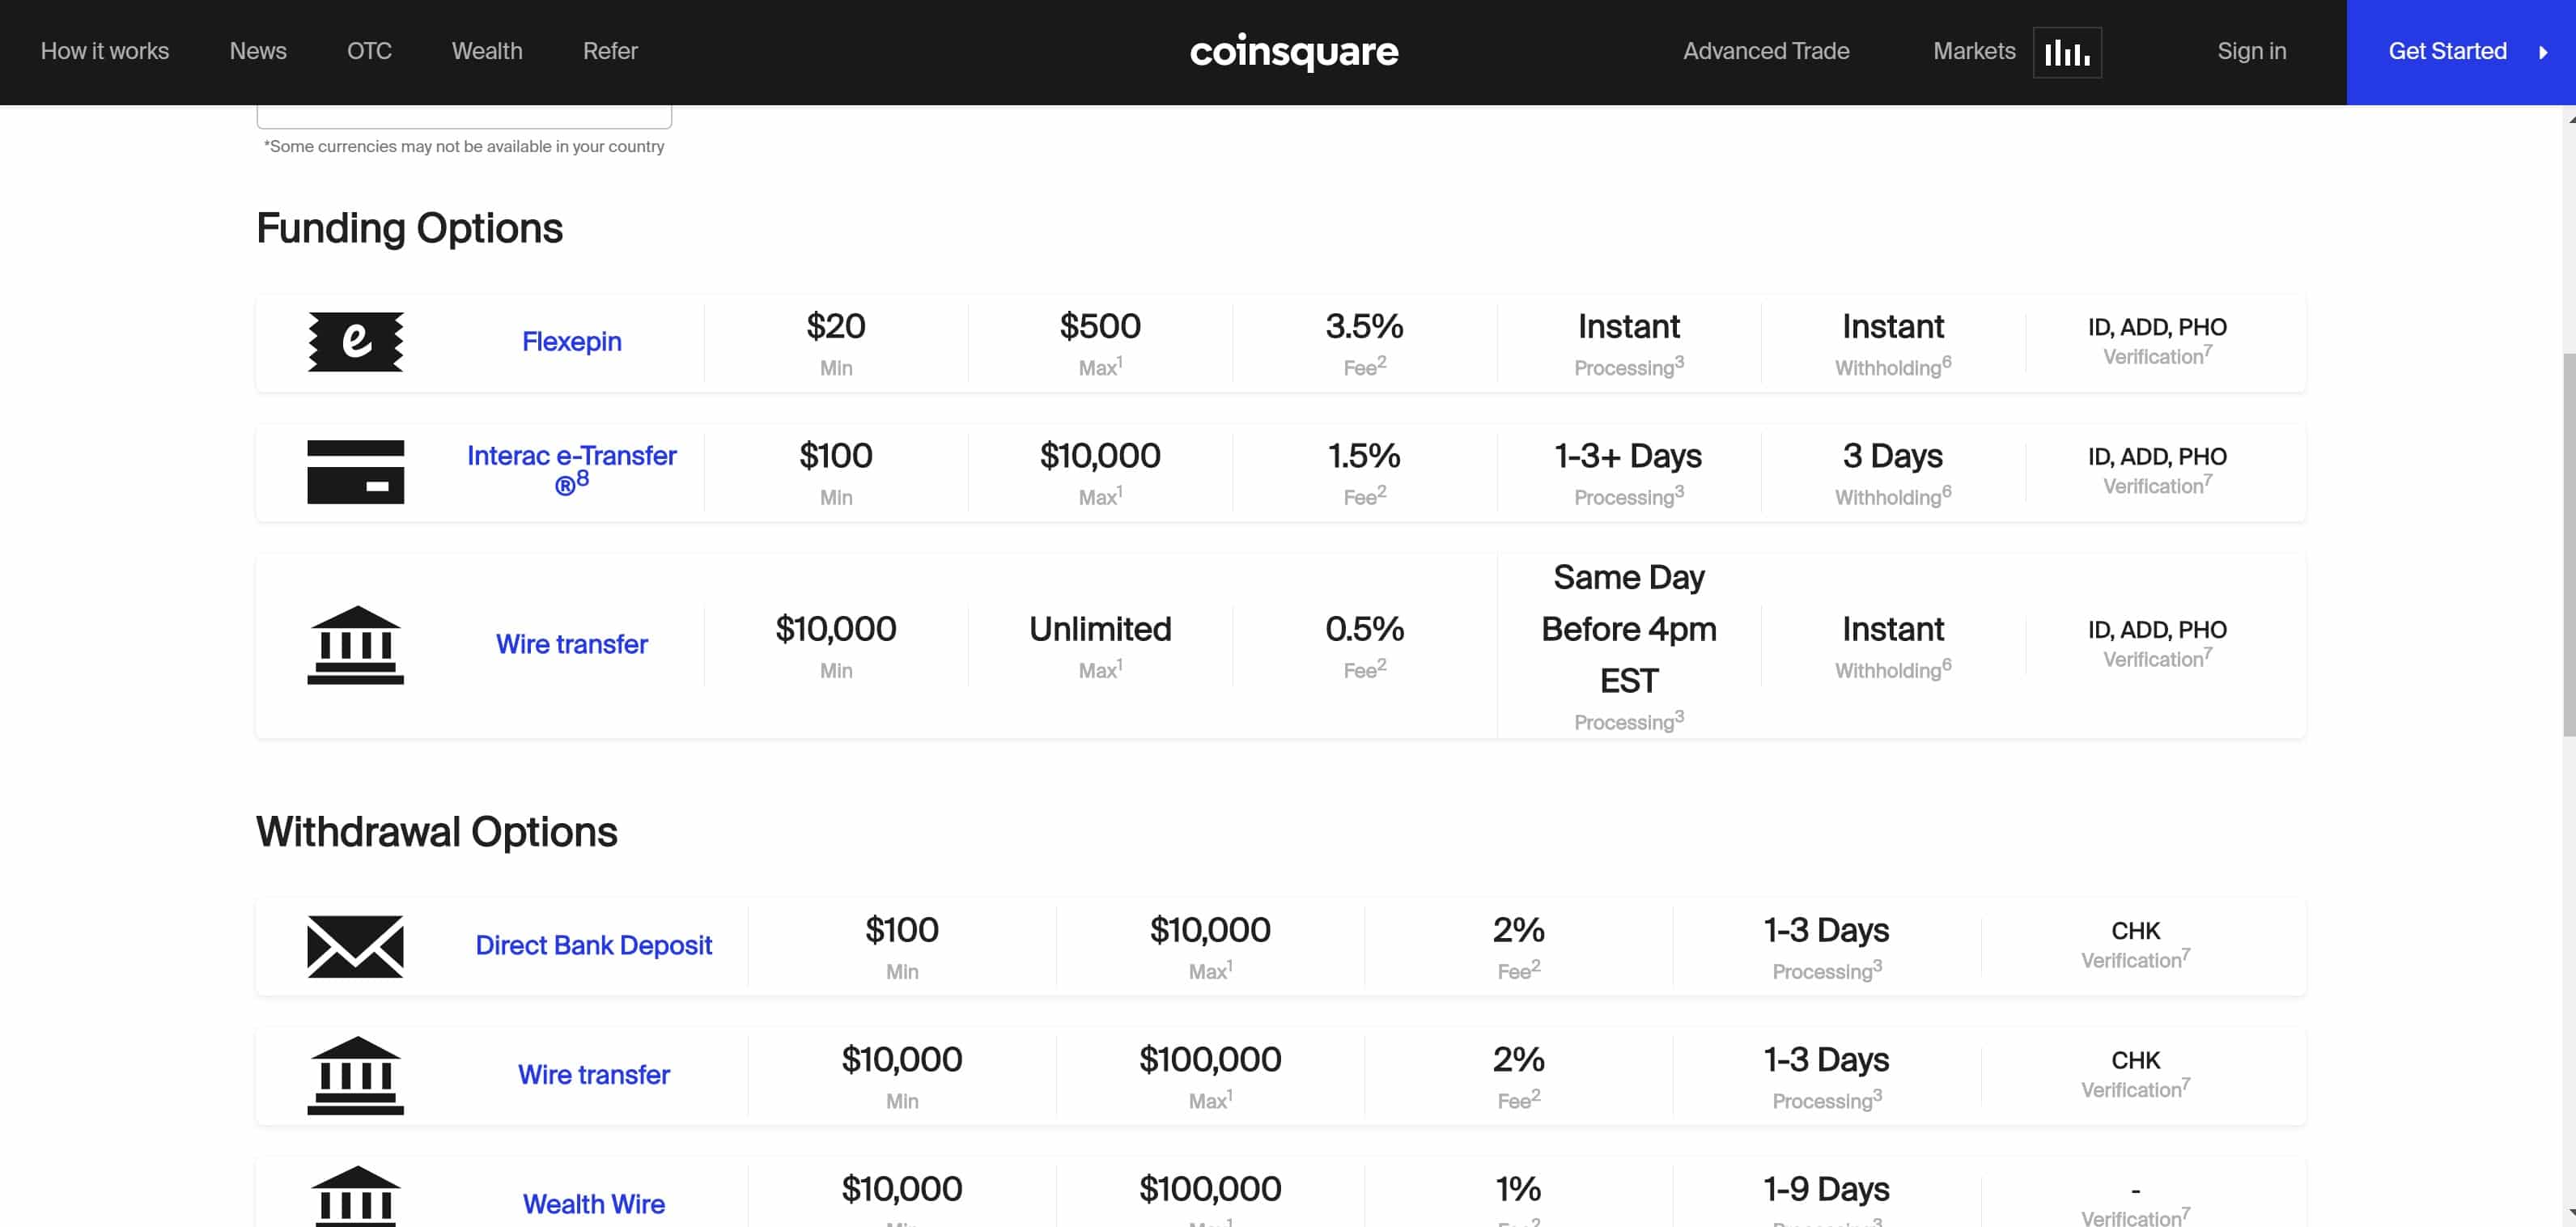 Coinsquare Funding Options